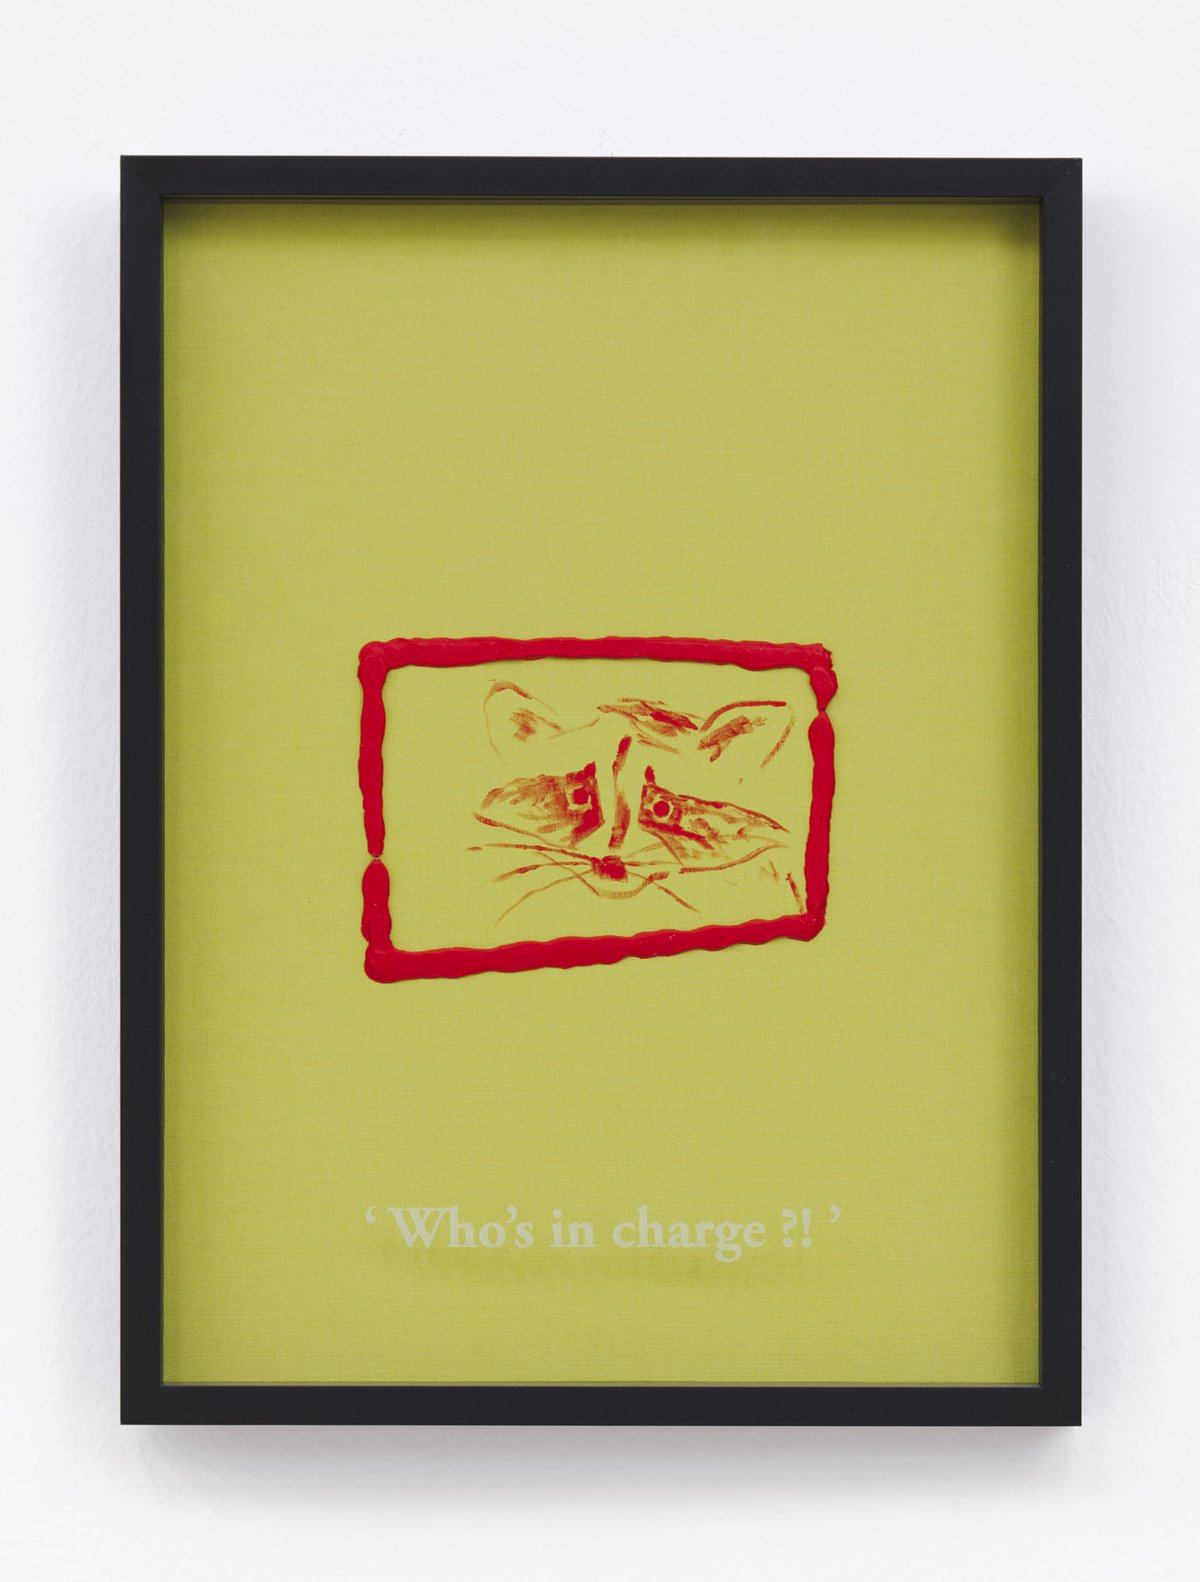 Philipp Timischl&quot;Who&#x27;s in charge?!&quot; (Lime/Vermillion Depp), 2017Acrylic on linen and glass-engraved object frame40.1 x 32.1 cm